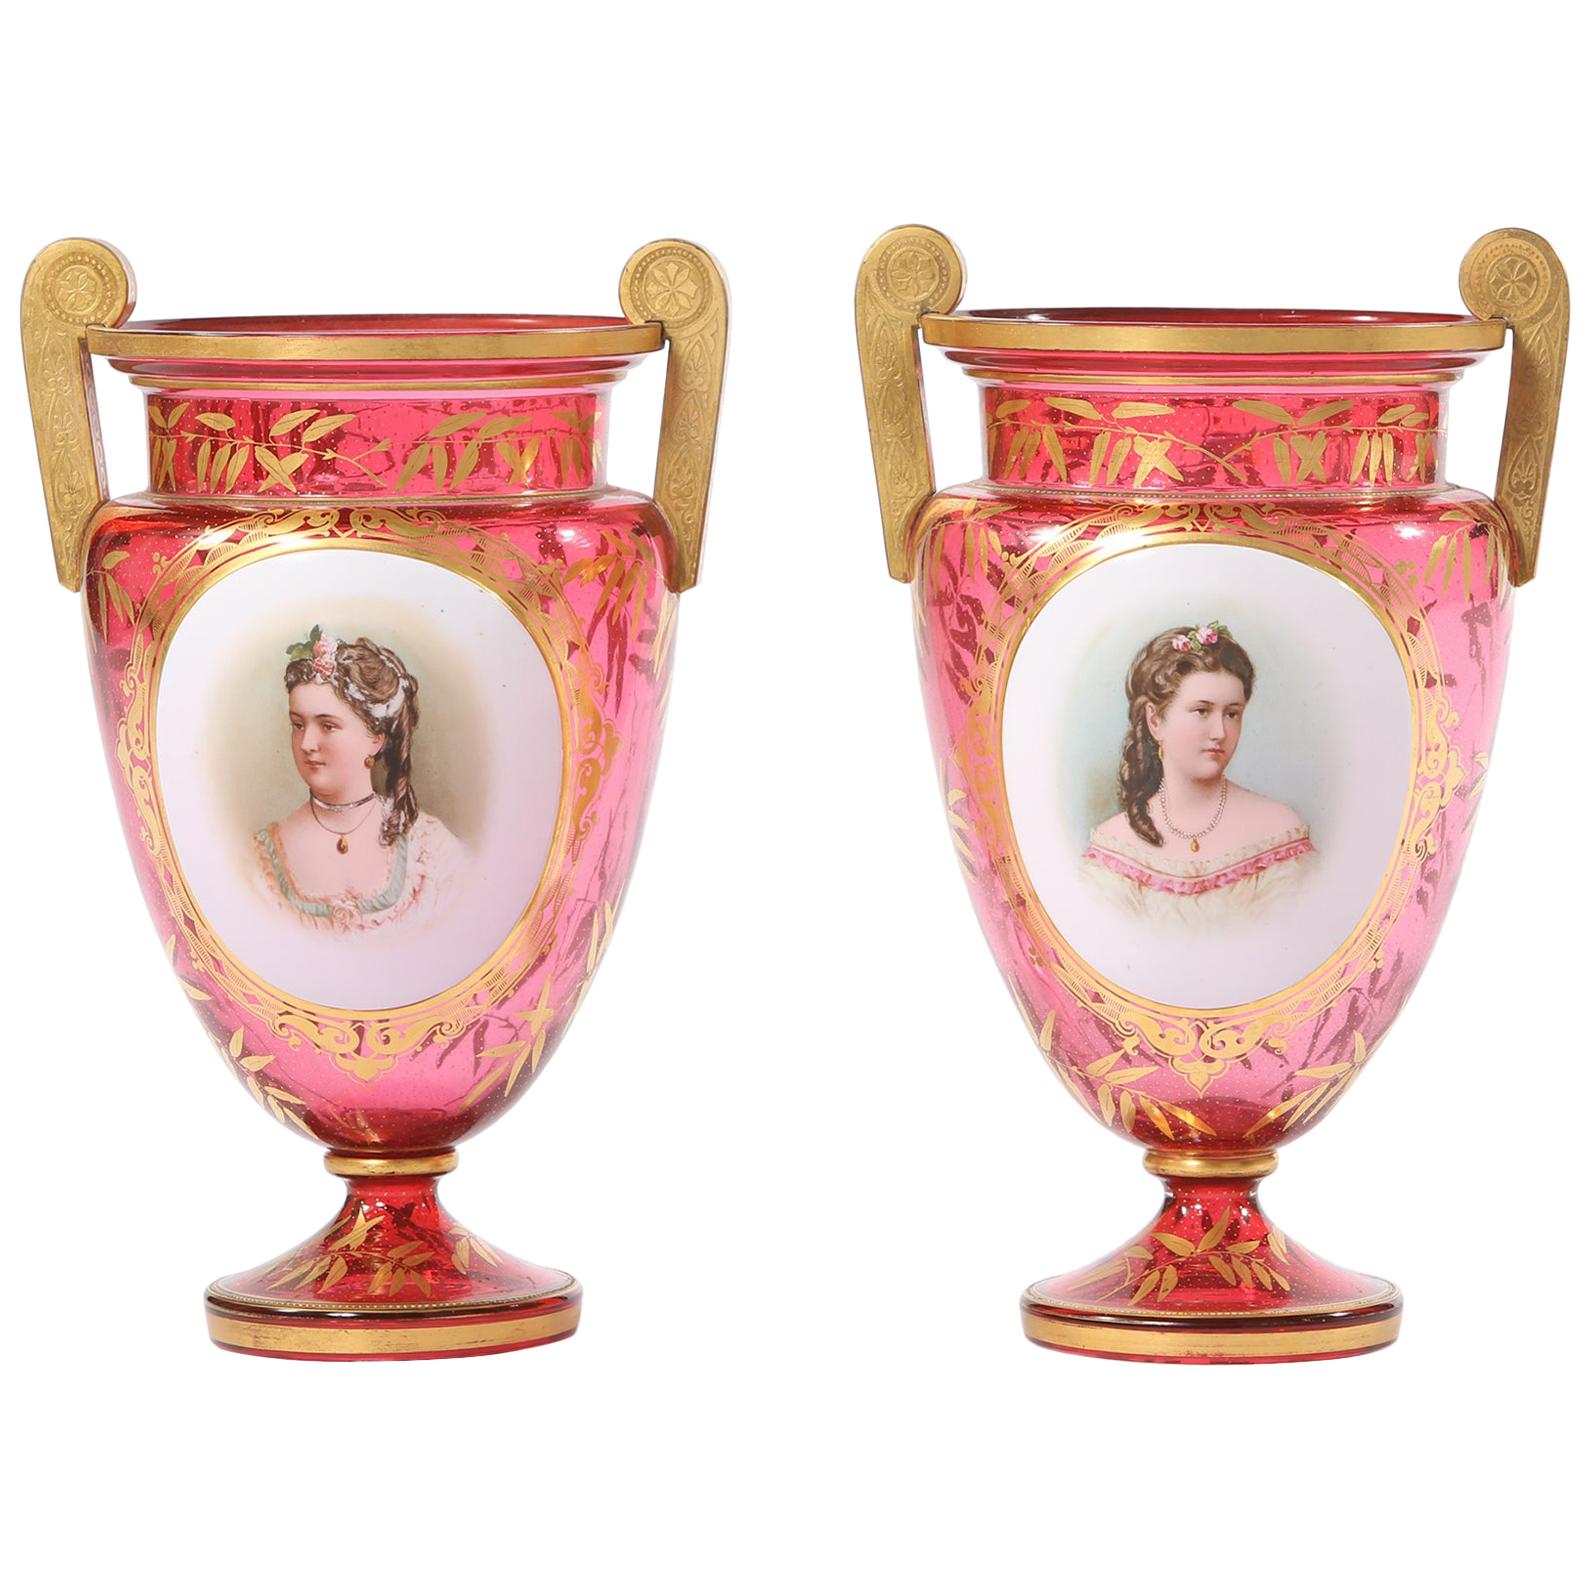 Early 19th Century Gilt Glass Pair of Vases or Urns